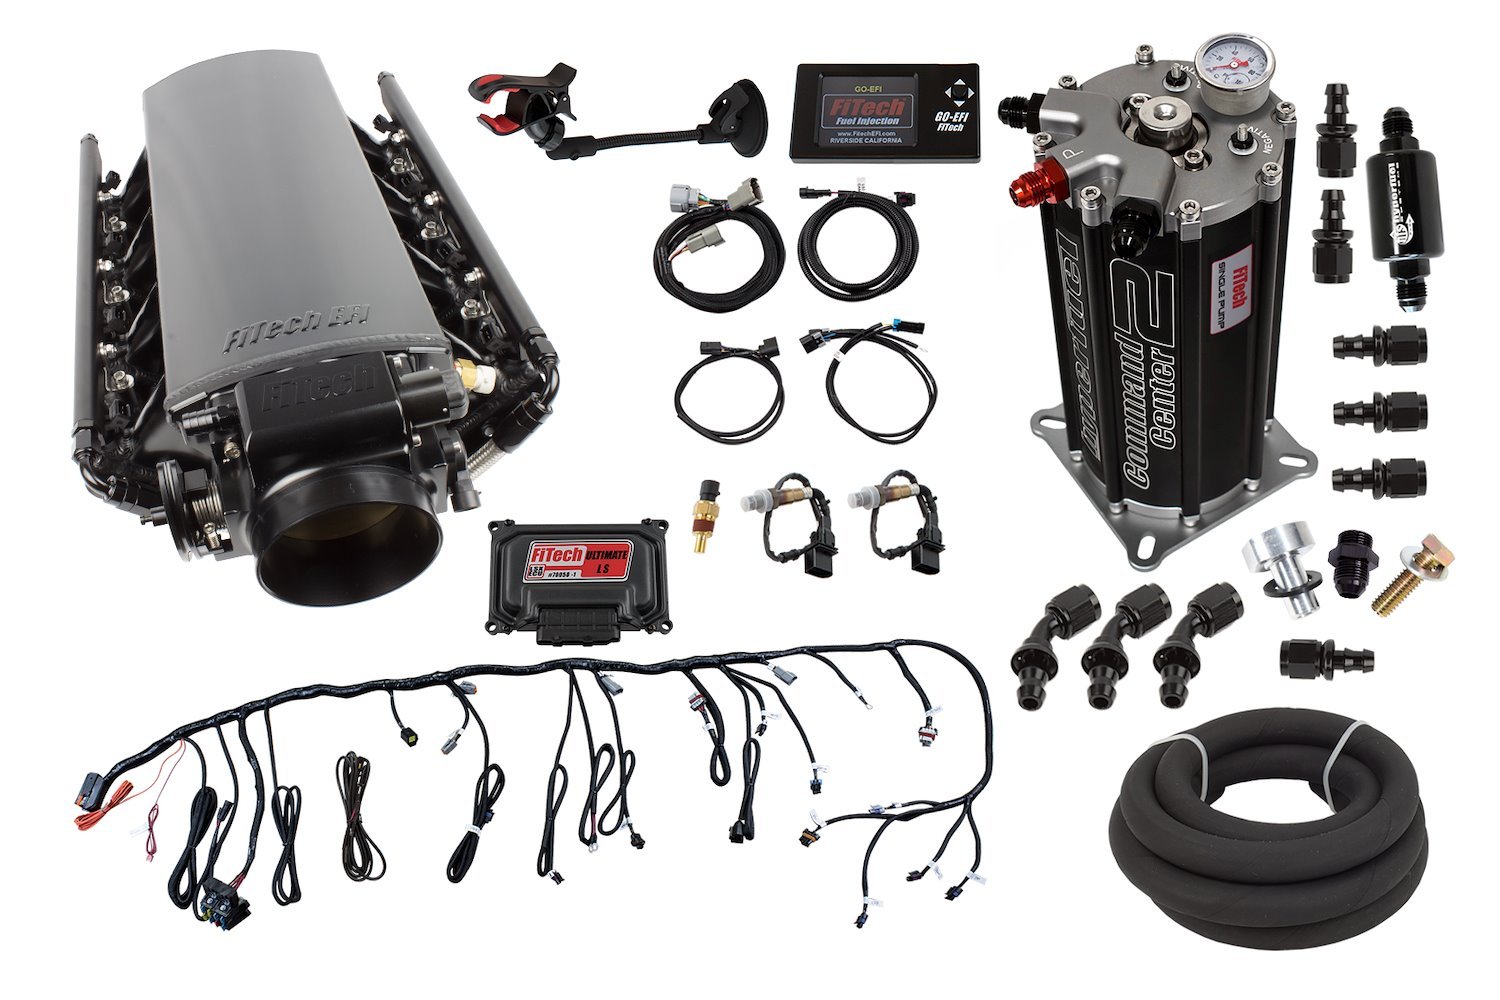 Ultimate LS EFI Induction System LS7 500 HP with Transmission Control and Fuel Command Center 2.0